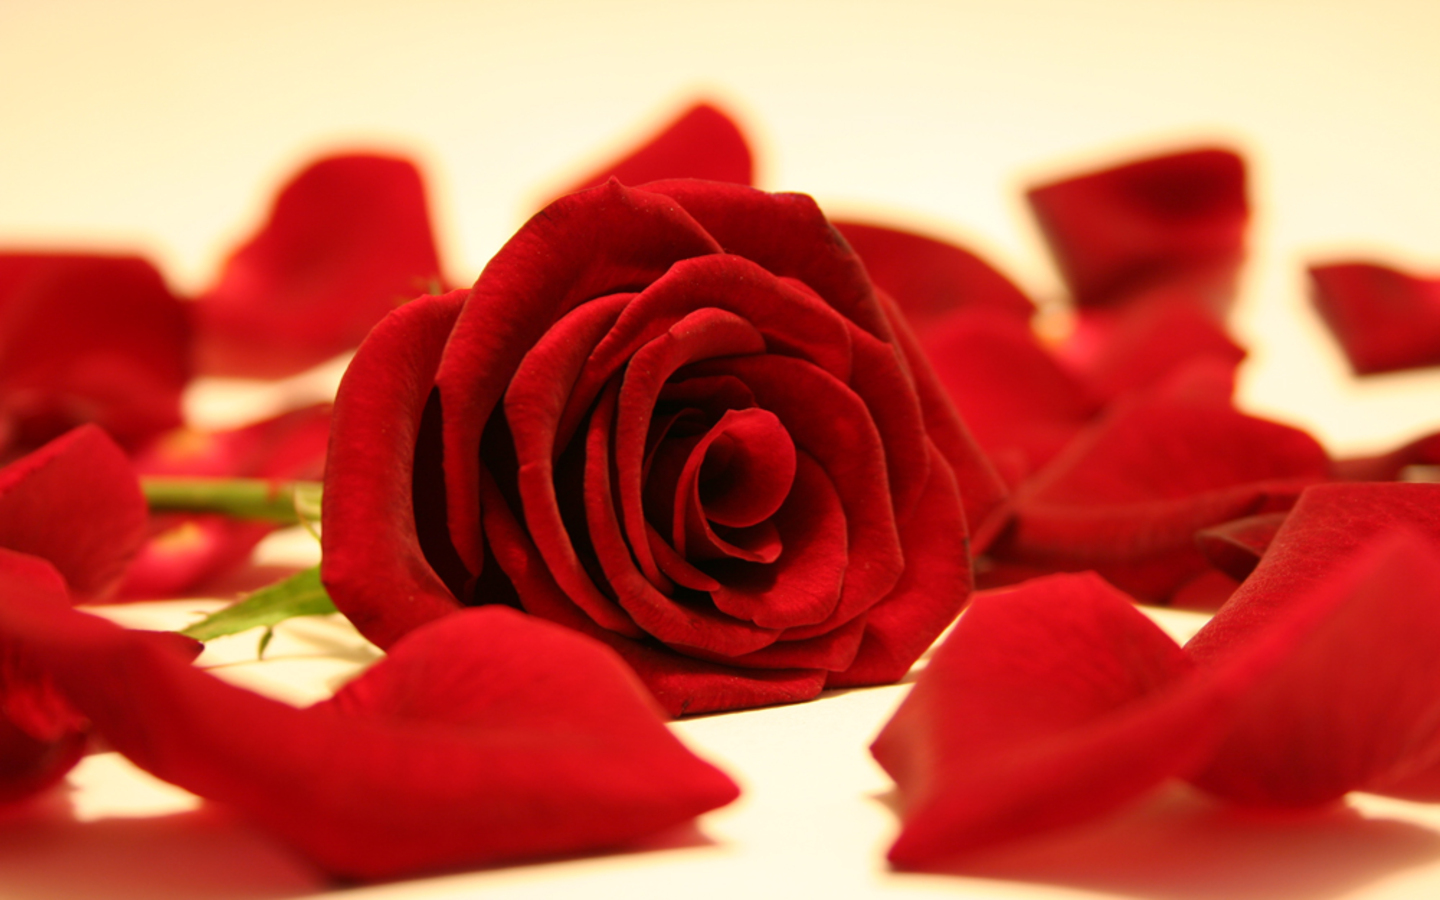 Flowers Image Red Rose Wallpaper Photos